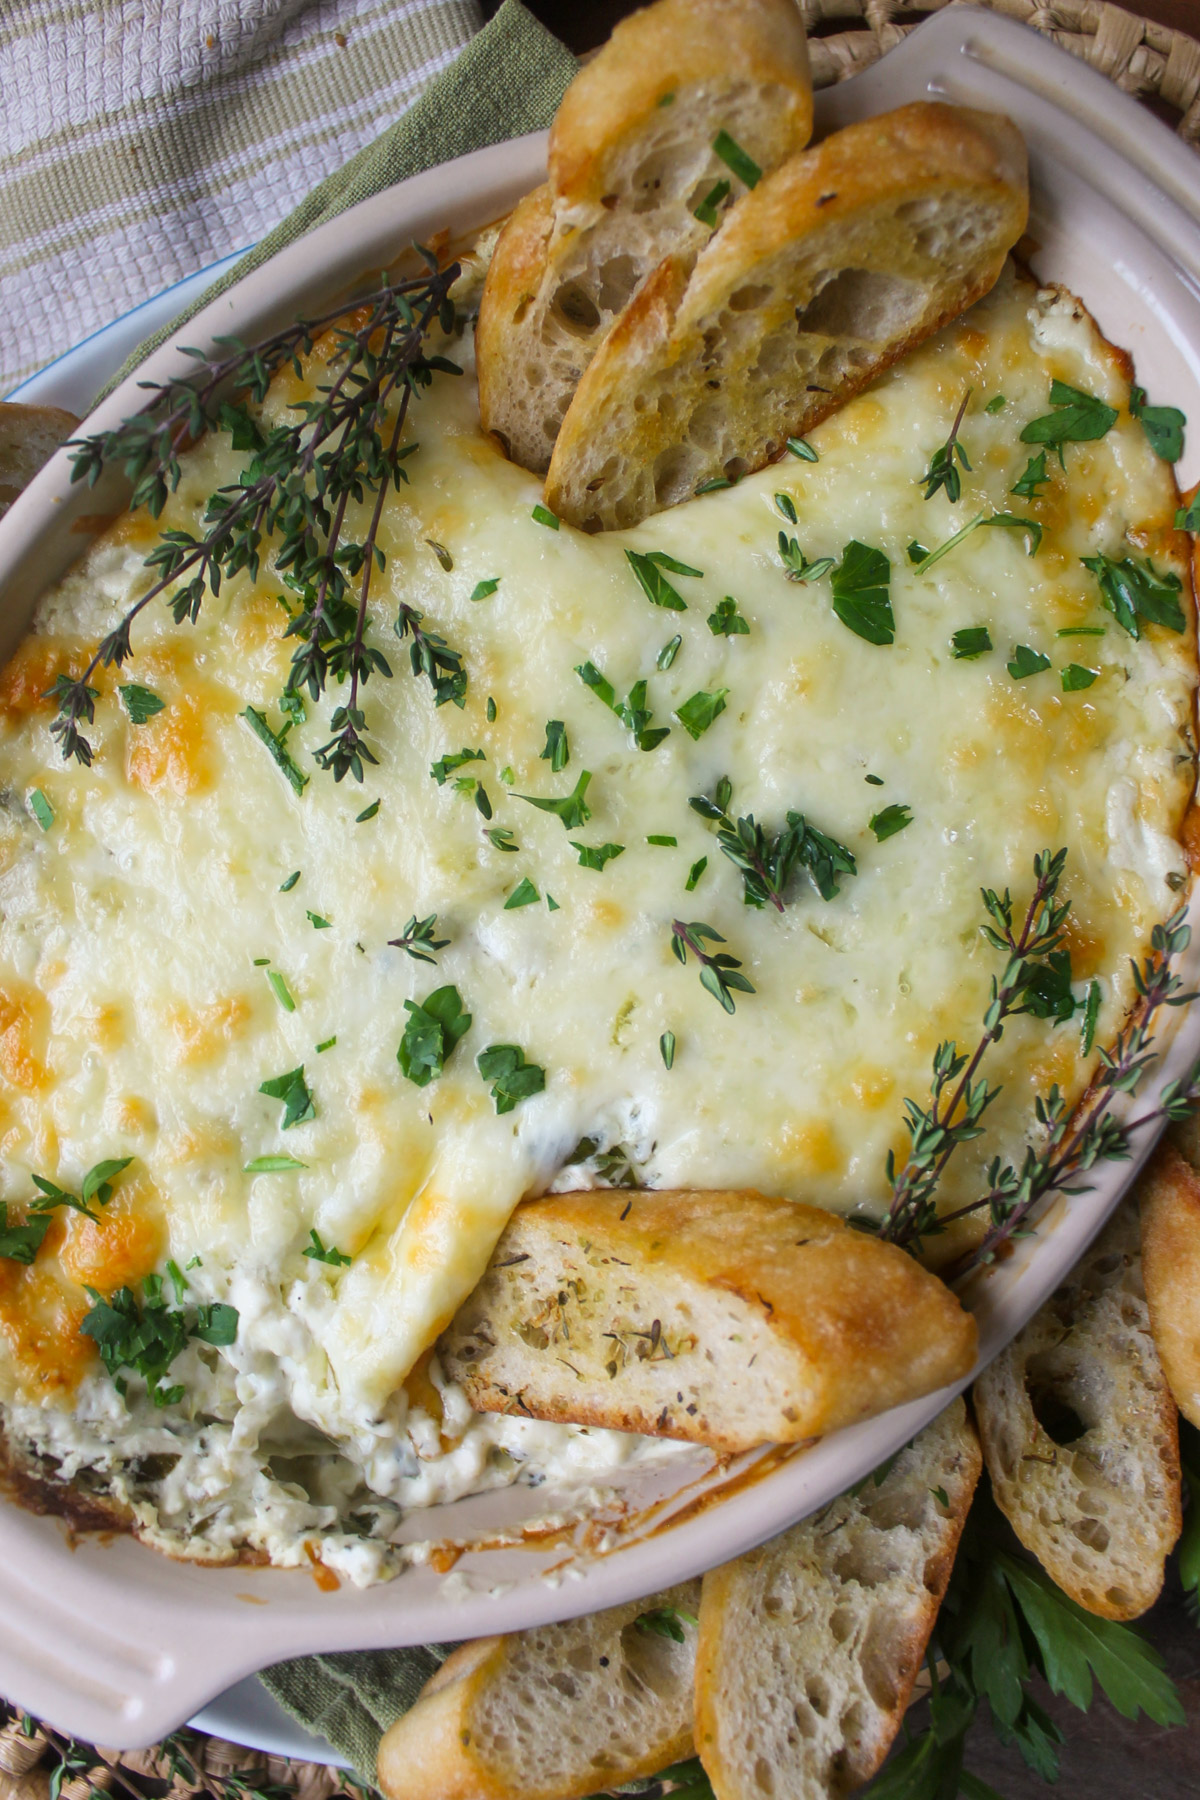 Baked goat cheese artichoke dip with green herbs and toasted baguette slices.